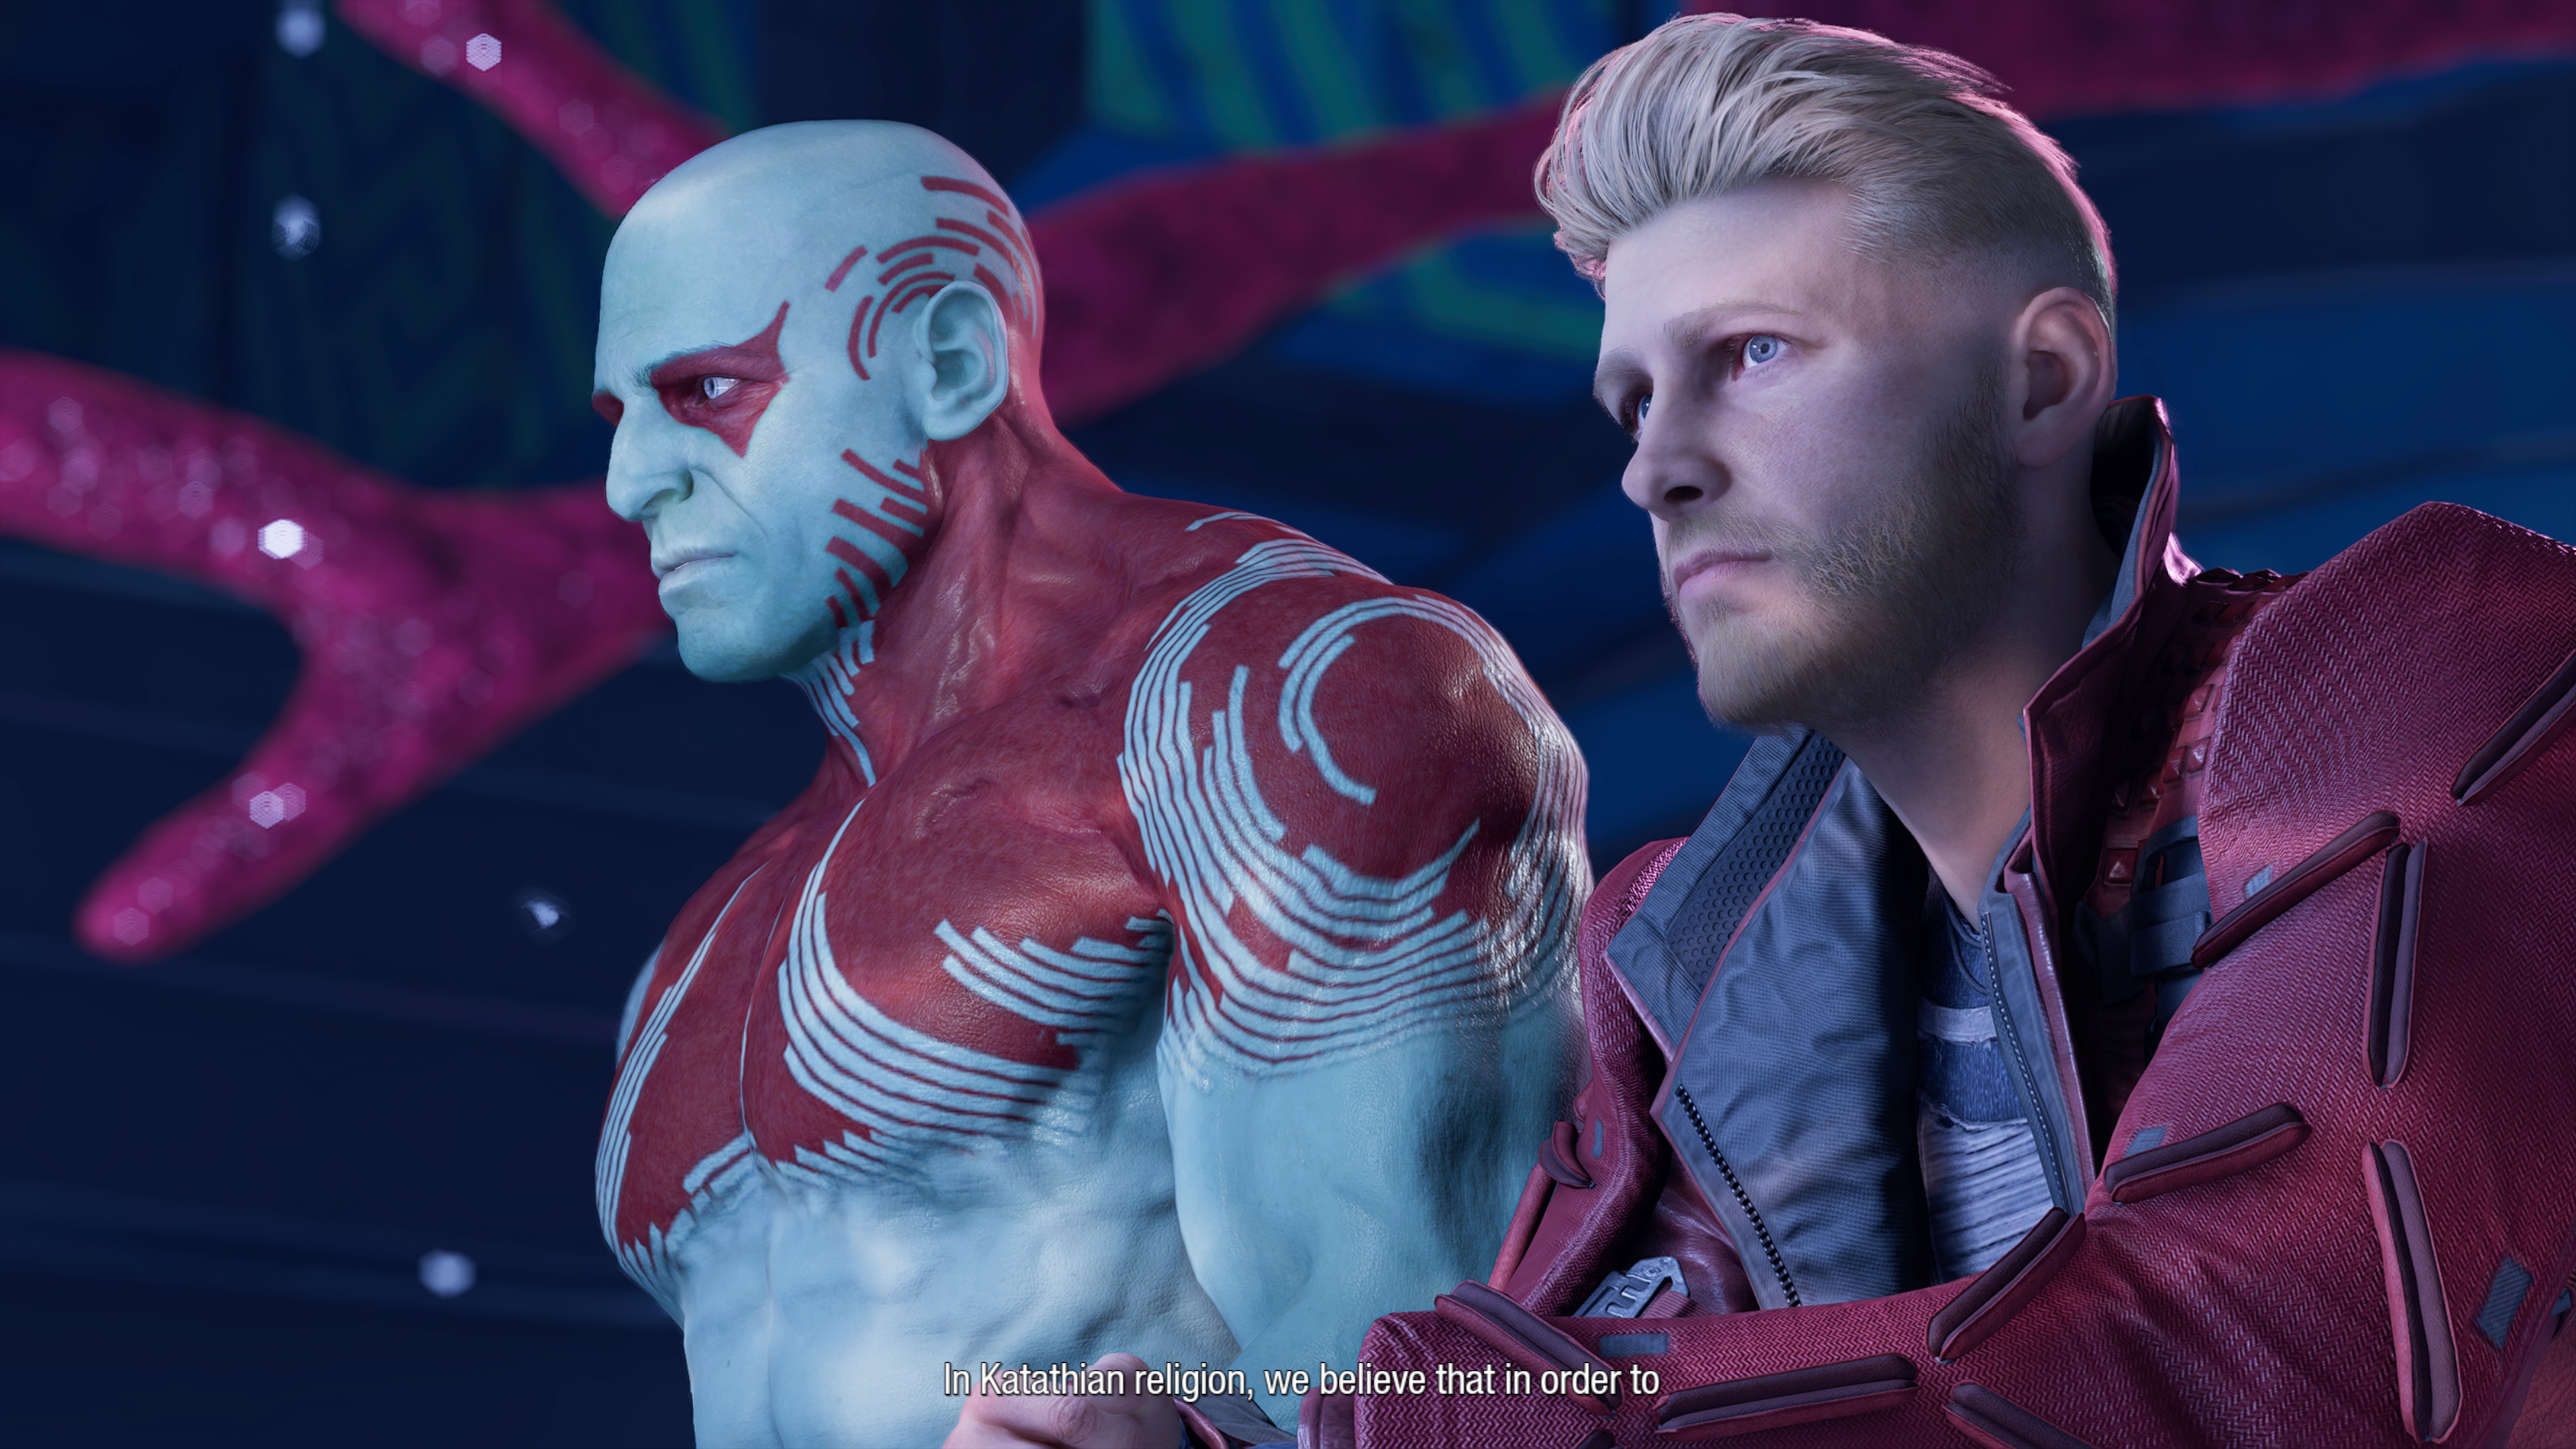 Drax and Peter share a somber moment.